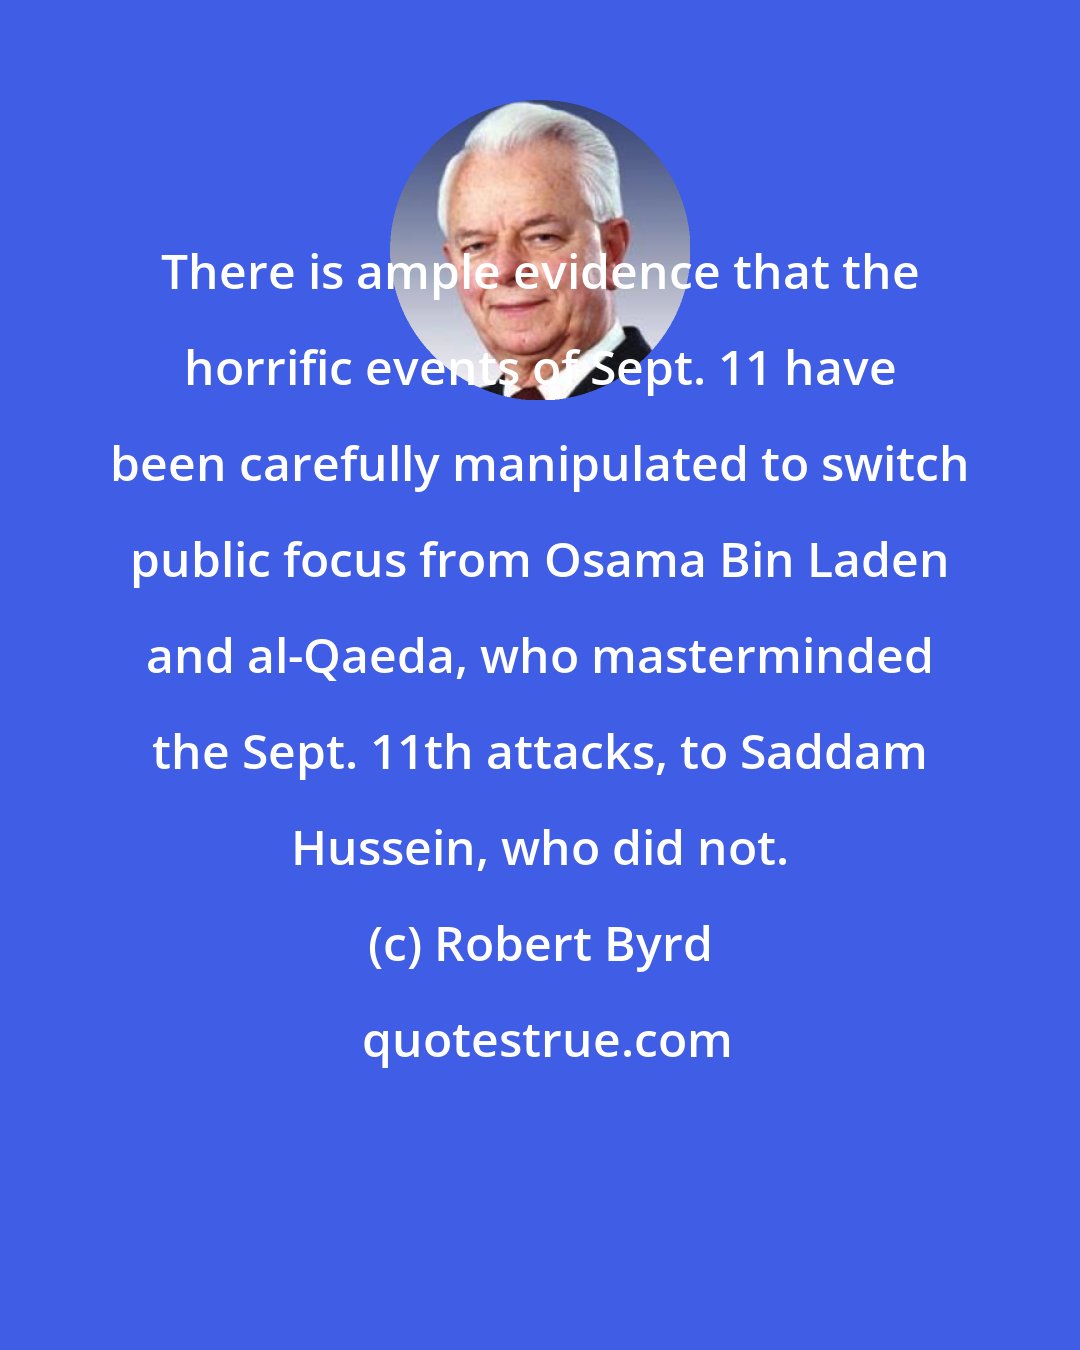 Robert Byrd: There is ample evidence that the horrific events of Sept. 11 have been carefully manipulated to switch public focus from Osama Bin Laden and al-Qaeda, who masterminded the Sept. 11th attacks, to Saddam Hussein, who did not.